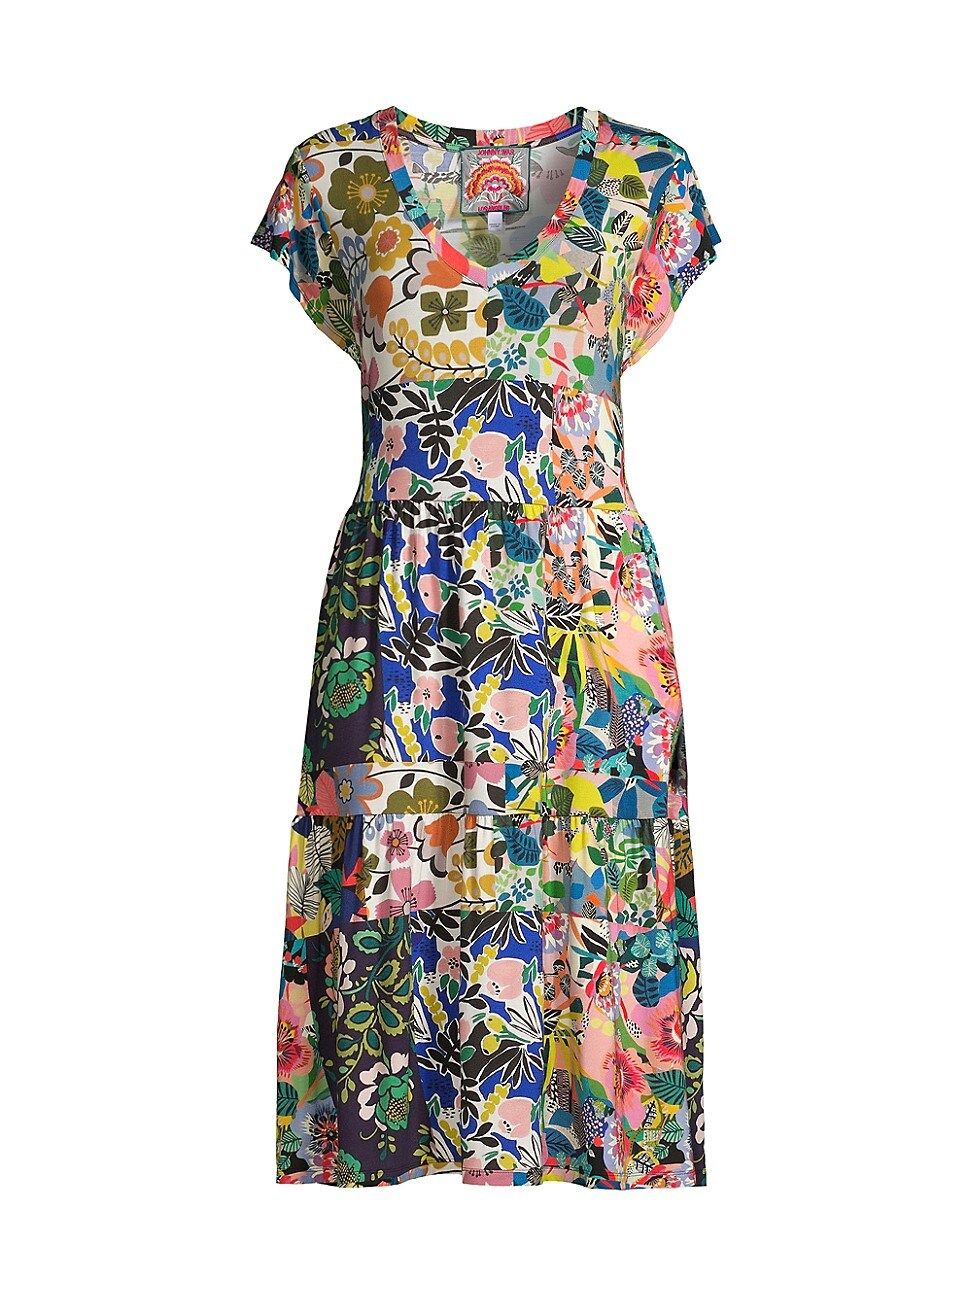 Chelsea Tiered Floral Dress | Saks Fifth Avenue